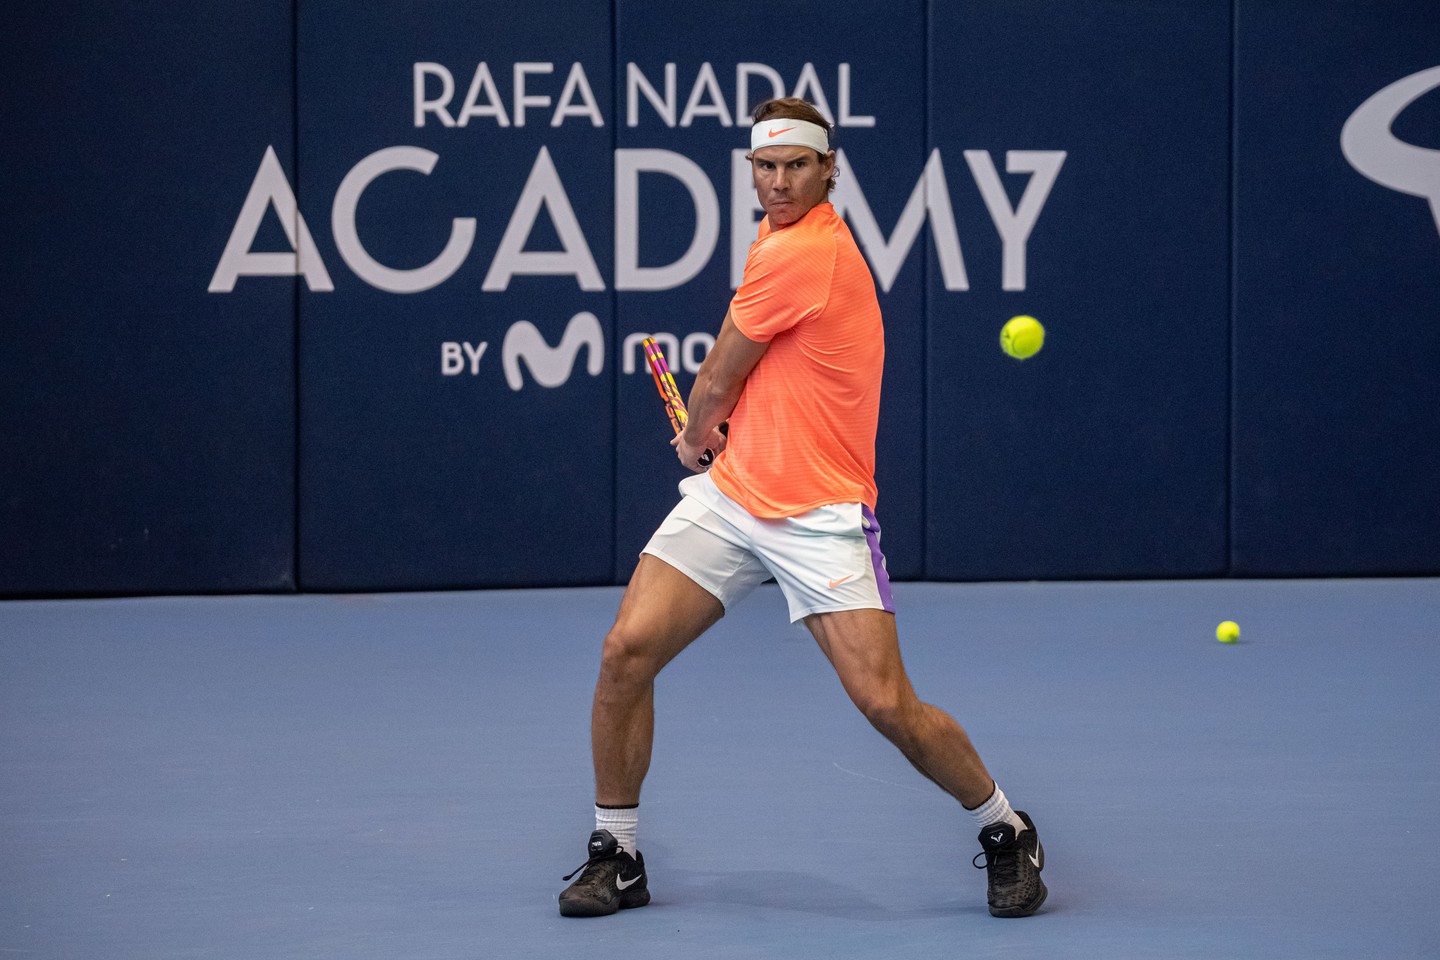 RAFA NADAL ACADEMY TO COURT HK TALENT  拿度網球學校落戶香港 培養網壇精英  Good news for tennis players and fans! Spanish ace Rafa Nadal has chosen Hong Kong as the venue for his first eponymous tennis centre in Asia! Set to open in the picturesque Sai Kung district in July, it will bring in coaches from the Rafa Nadal Academy's campus in Mallorca. The latter has proven to be a breeding ground, boasting international top seed players such as local star Coleman Wong, the reigning junior doubles champion for both the US Open and Australian Open!  網球愛好者佳音！西班牙拿度網球學校 (Rafa Nadal Academy) 將在香港設立亞洲首間分校。學校將派出教練團隊來港，並為學員度身訂造訓練計劃，提供高強度及高質素訓練。剛奪得今屆美網及澳網青少年男雙冠軍的港將黃澤林，亦正在拿度網球學校受訓。  Rafa Nadal says he's "very excited about this new international project in Hong Kong".   拿度對能在香港推行這國際性項目感很興奮。   @rafanadalacademy @rafaelnadal   Photo: Hong Kong Golf & Tennis Academy 圖片：香港高爾夫球及網球學院  #hongkong #asiasworldcity #brandhongkong #RafaNadal #dynamichk #ColemanWong #Tennis #RafaNadalTennisCentre #RafaNadalAcademy #HKGTA #香港 #香港品牌 #亞洲國際都會 #活力澎湃 #拿度 #黃澤林 #拿度網球學校 #網球 #HKGTA #香港高爾夫球及網球學院